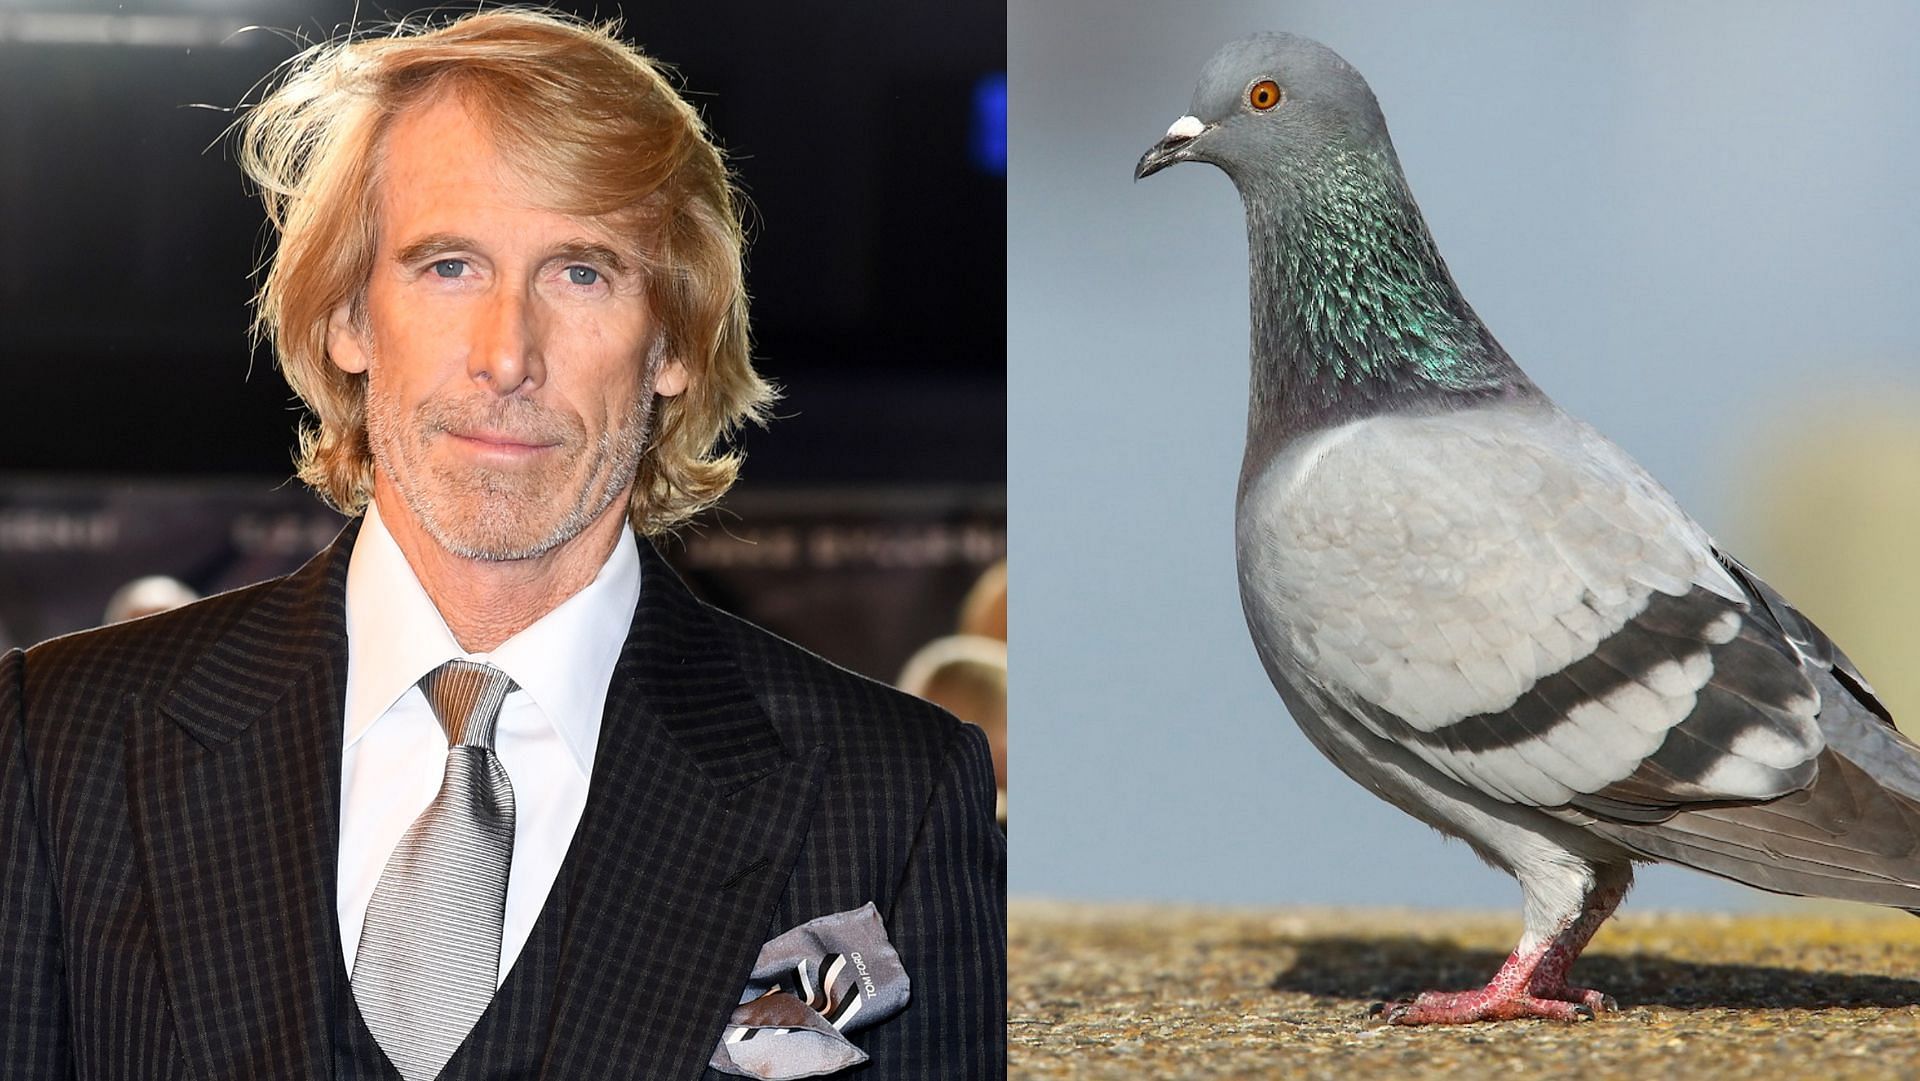 Hollywood director Michael Bay, whose current net worth is an estimated $500 million, gets charged with killing a pigeon during a movie shoot in Italy in 2018. (Image via Gareth Cattermole/Getty Images, Shutterstock)